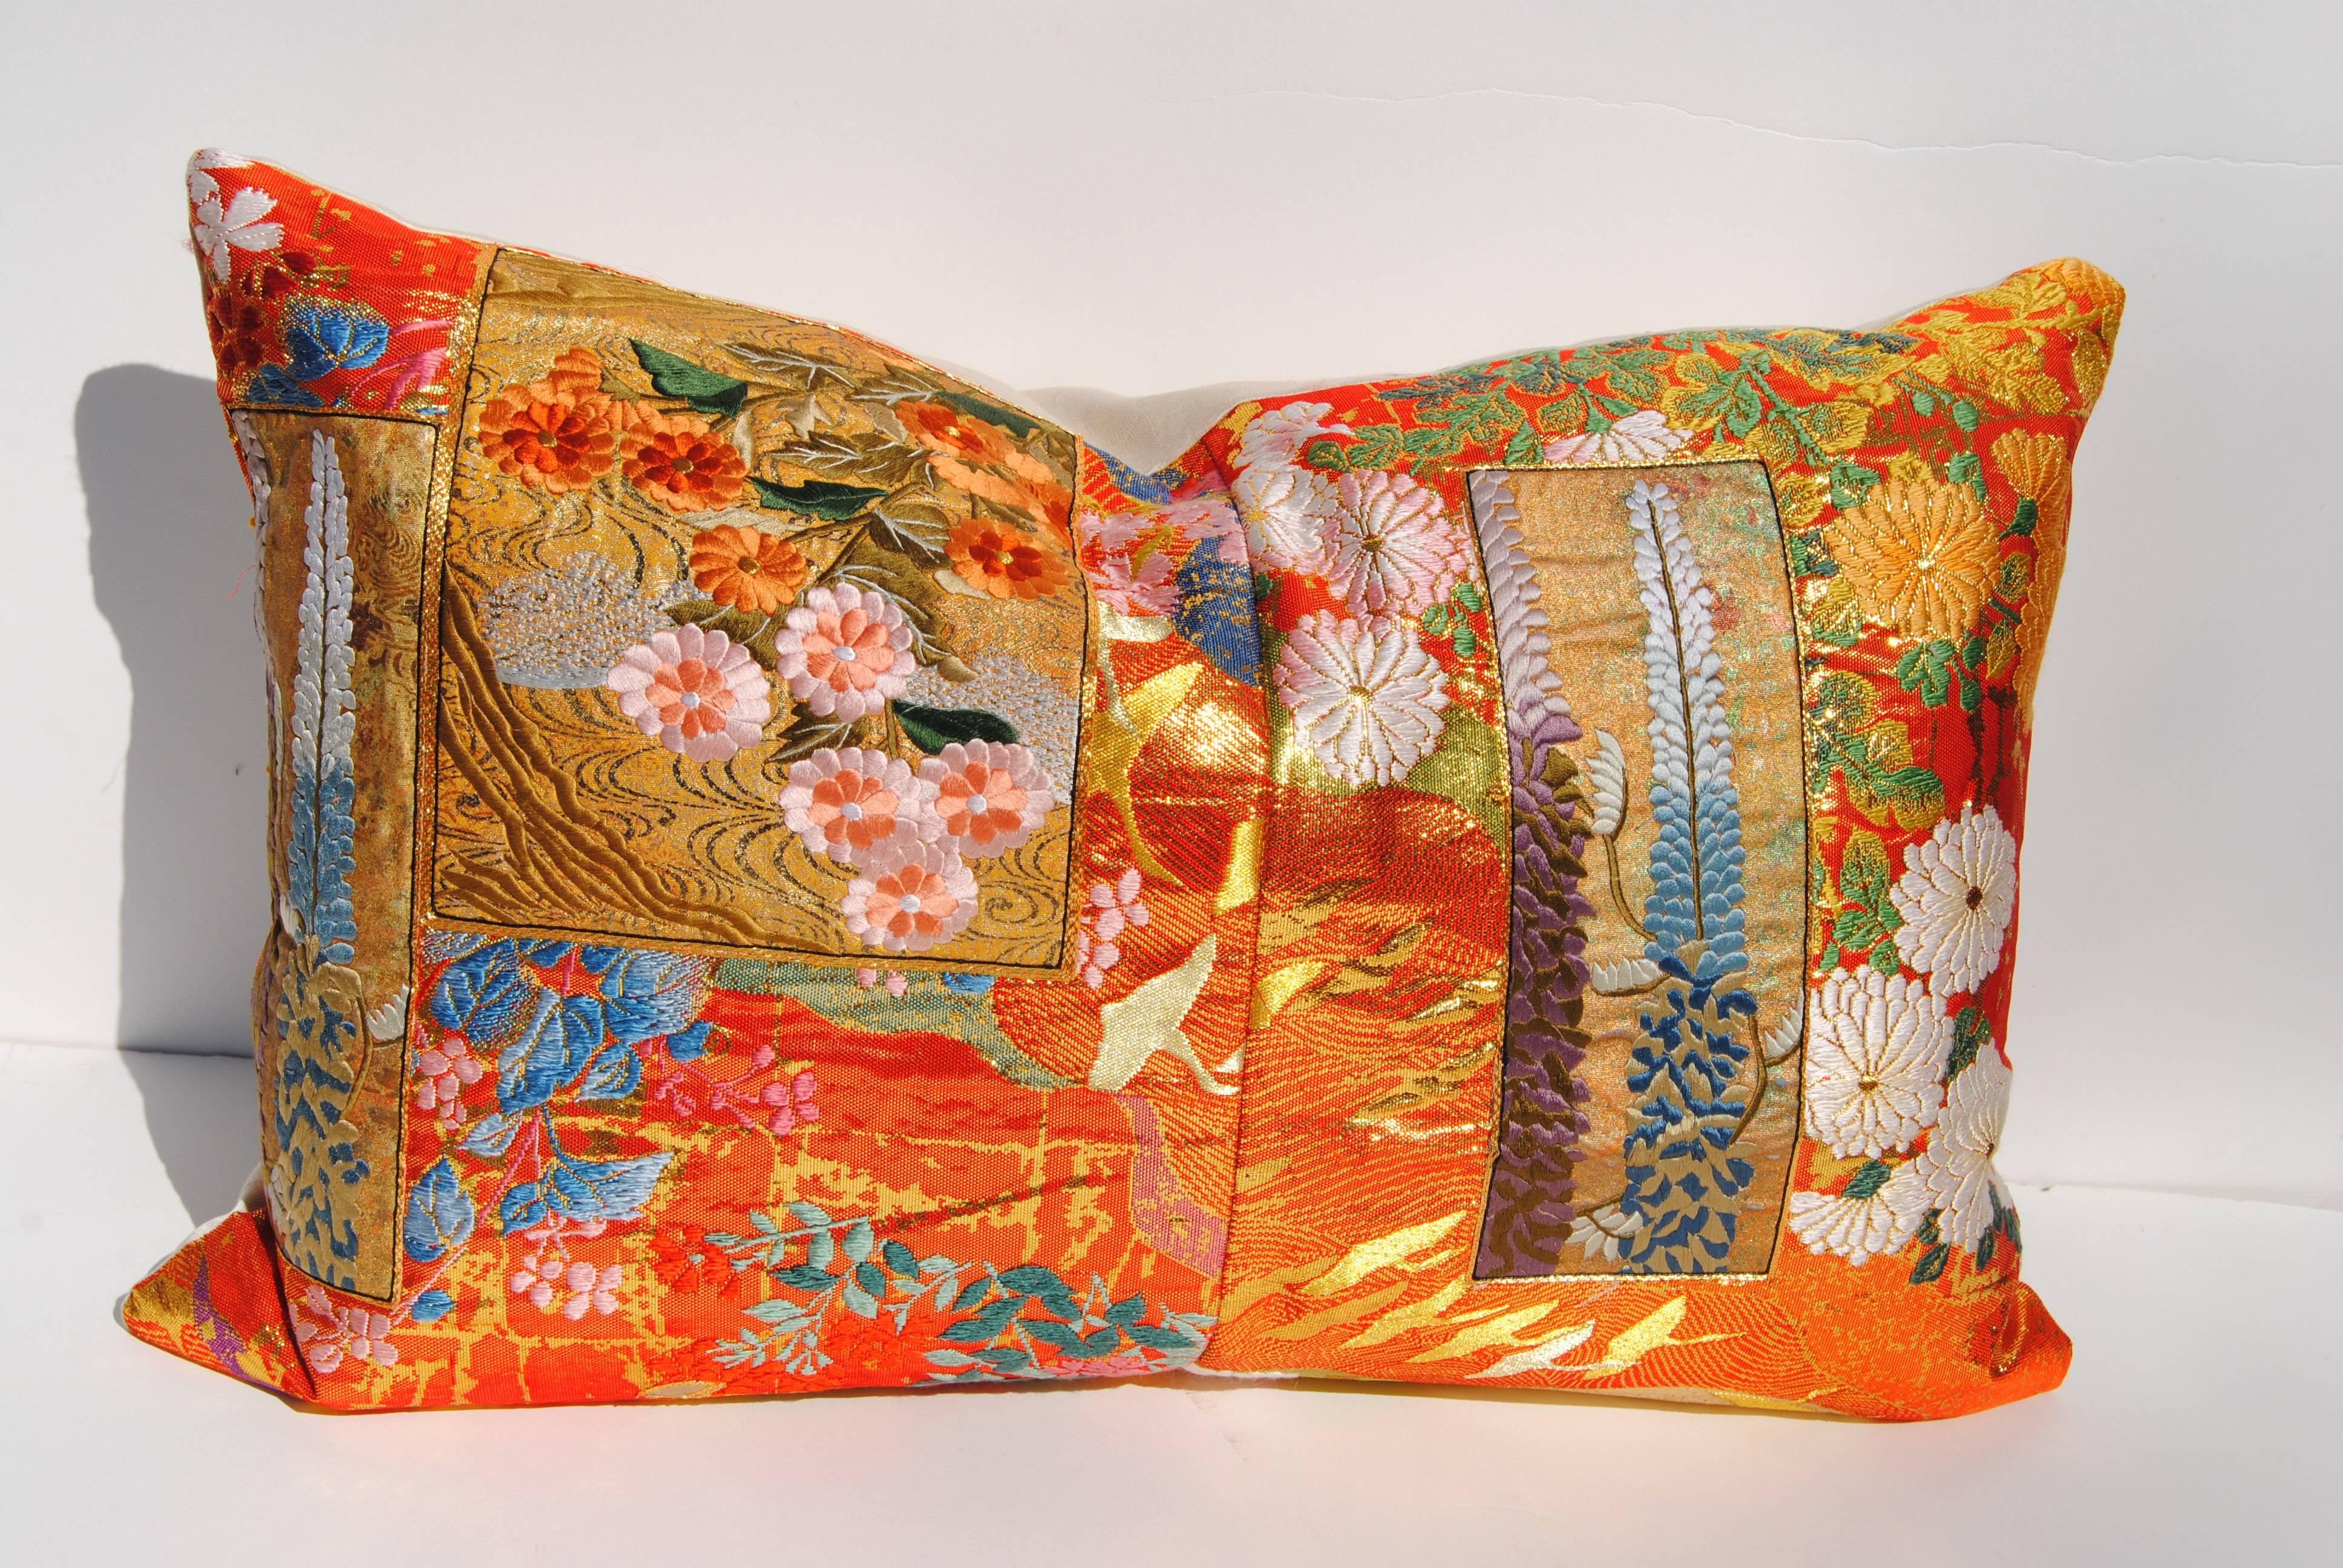 Custom pillow cut from a vintage Japanese silk uchikake, the traditional wedding kimono. The silk textile has a metallic thread background with florals and birds woven into the design. Finely embroidered silk patchwork adds exuberance to the